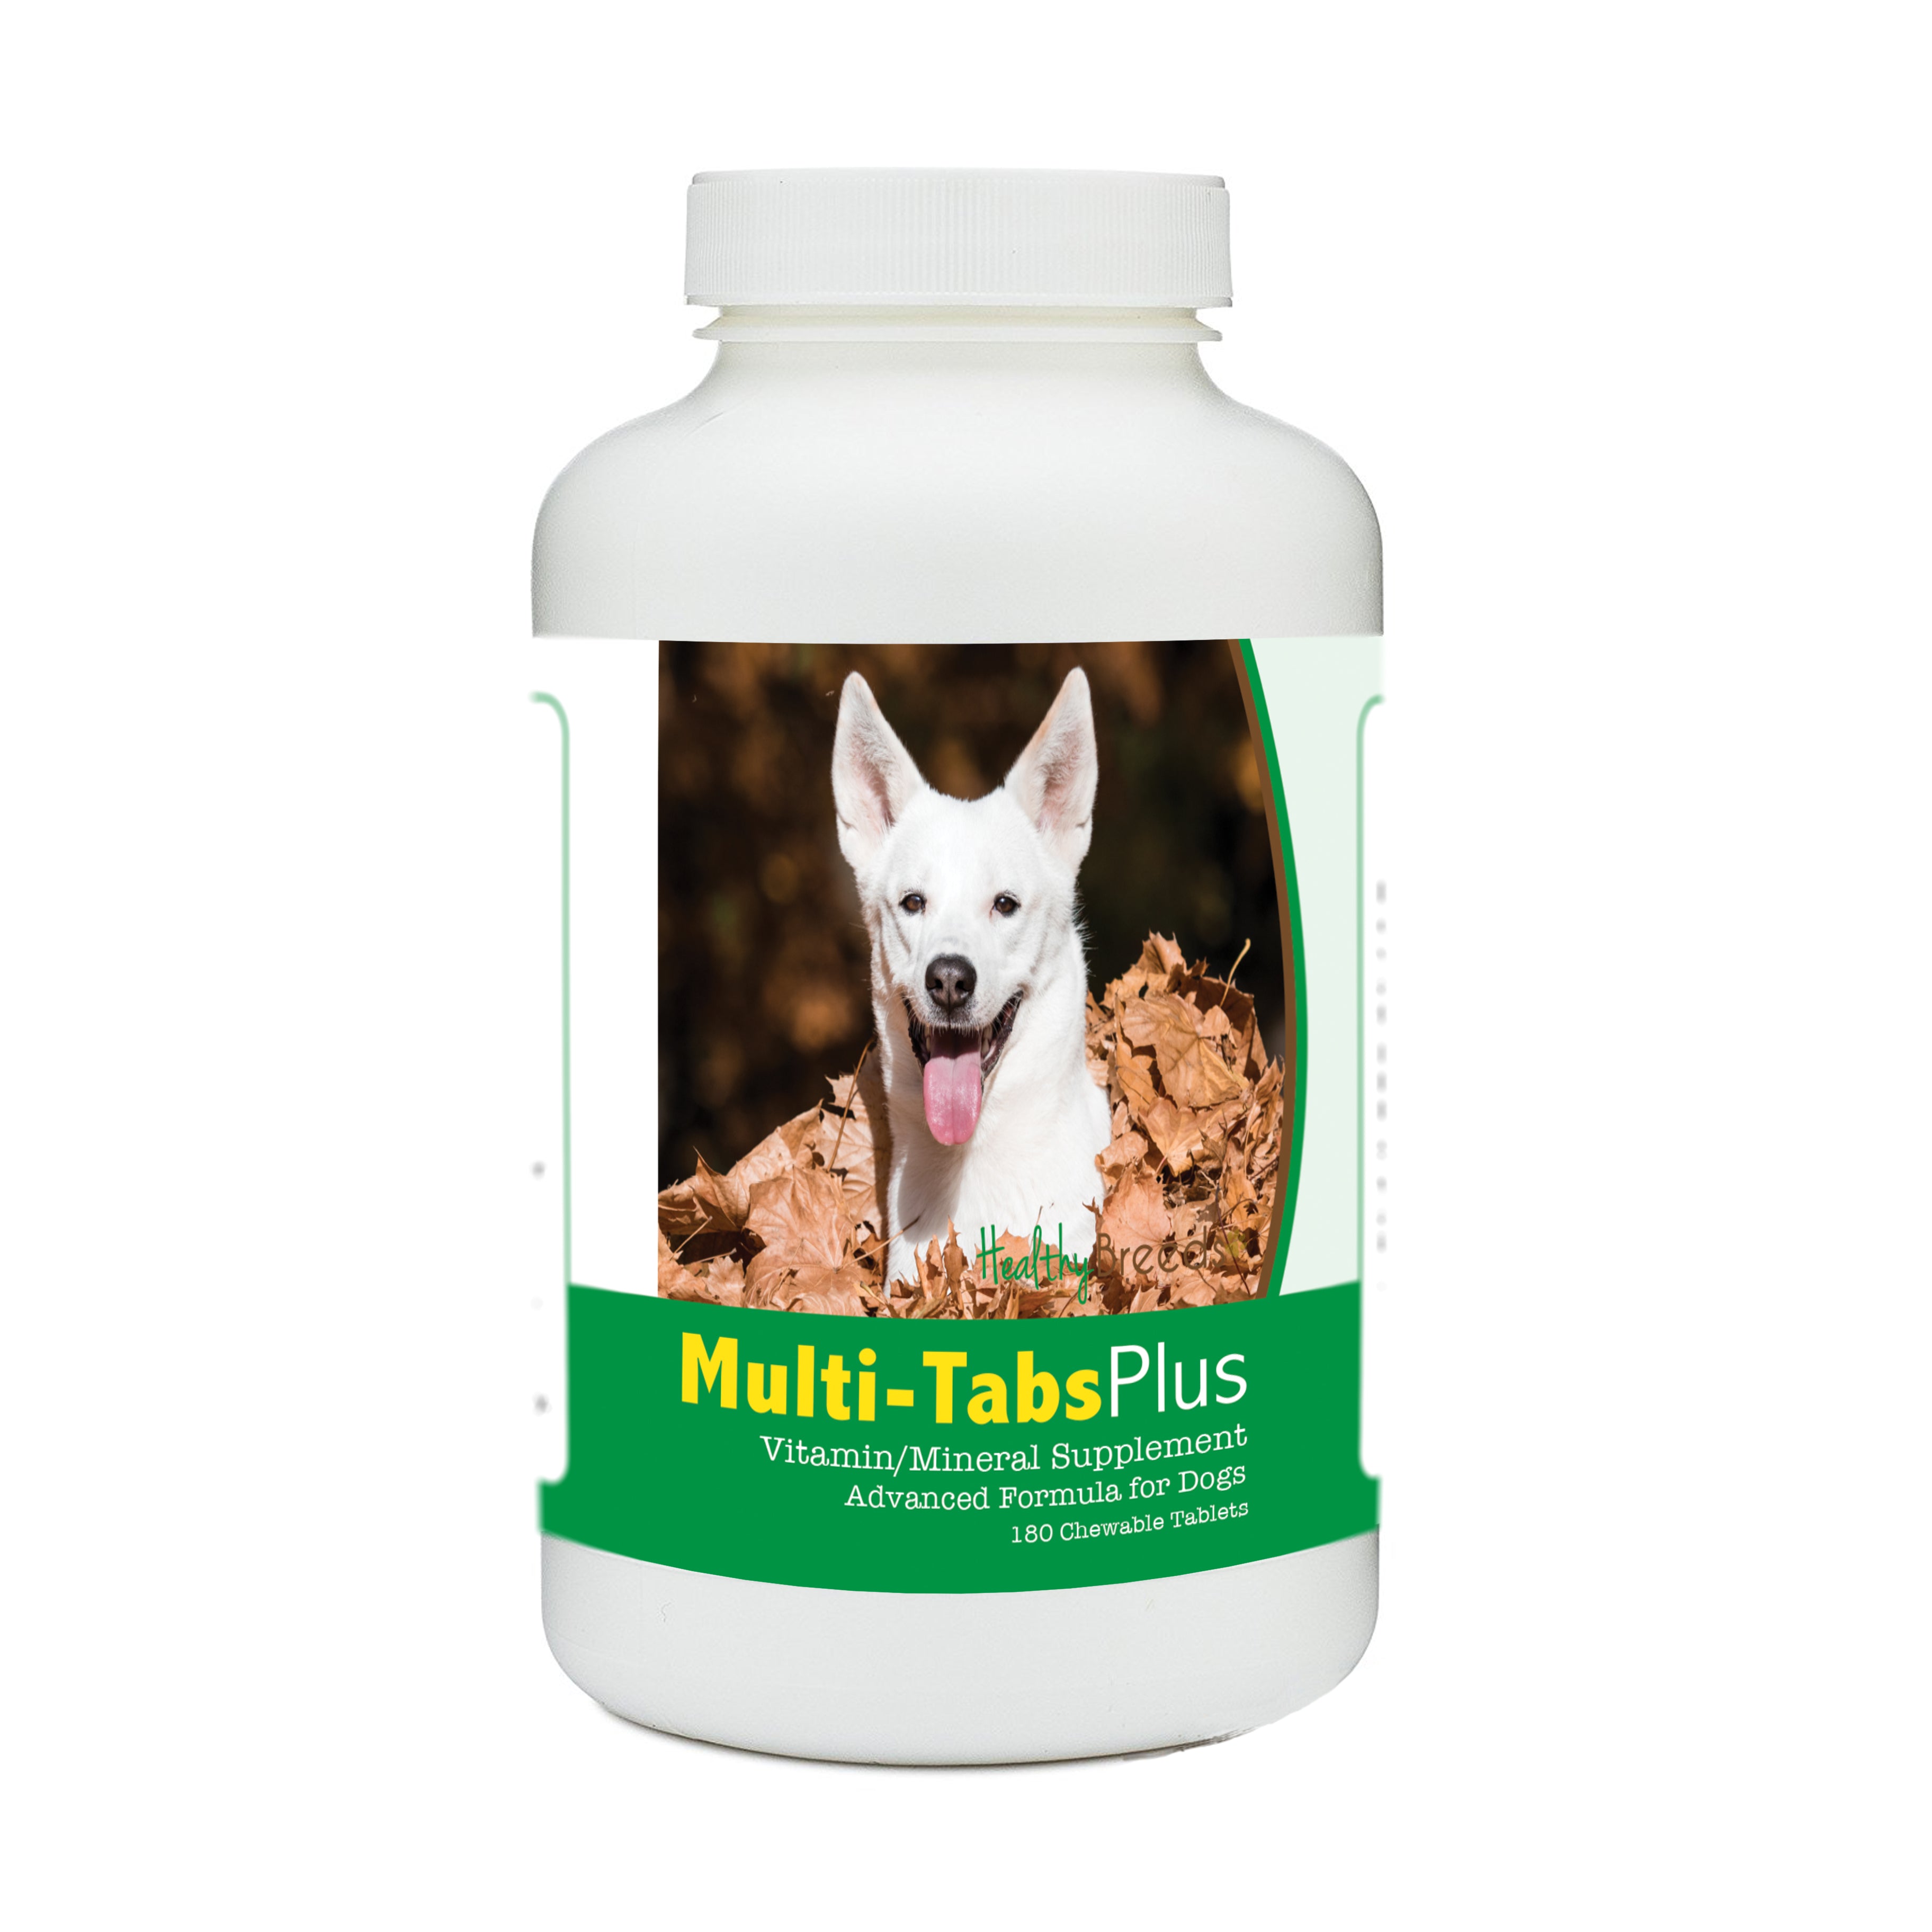 Canaan Dog Multi-Tabs Plus Chewable Tablets 180 Count